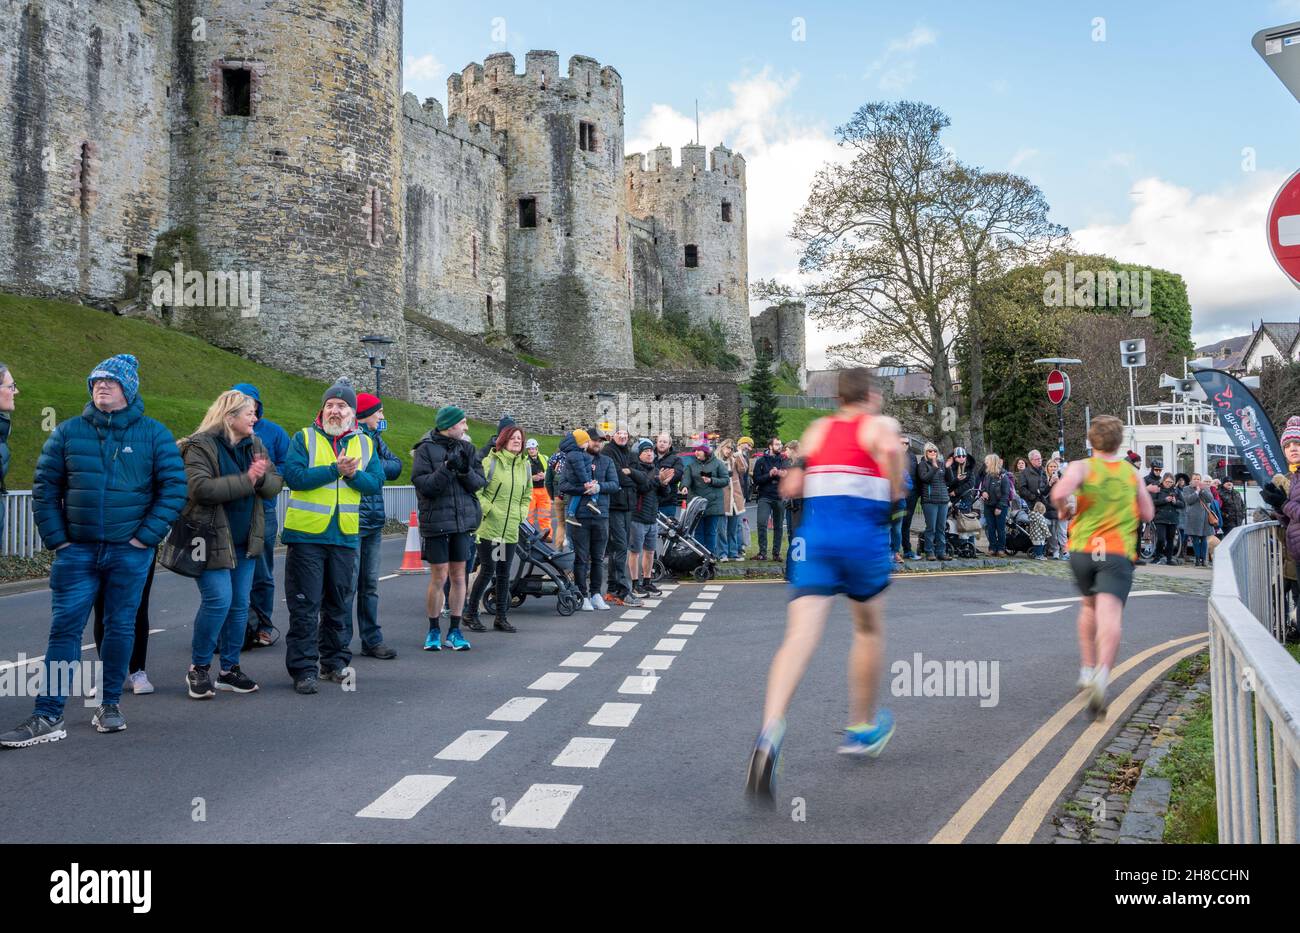 Runners at the finish line after competing in the Conwy 2021 half marathon, Wales. Stock Photo